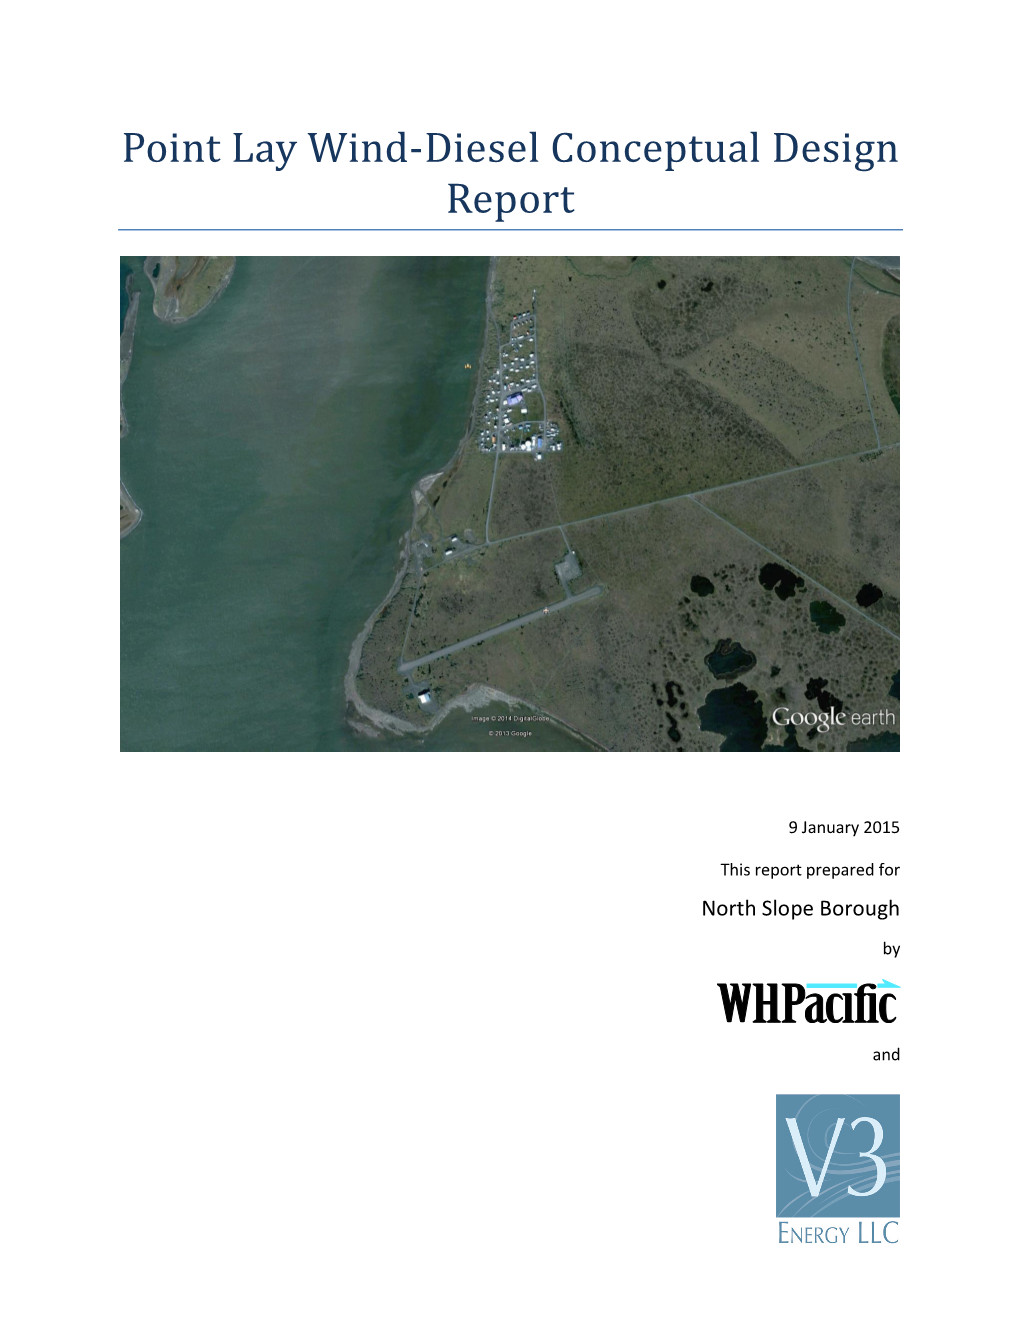 Point Lay Wind-Diesel Conceptual Design Report